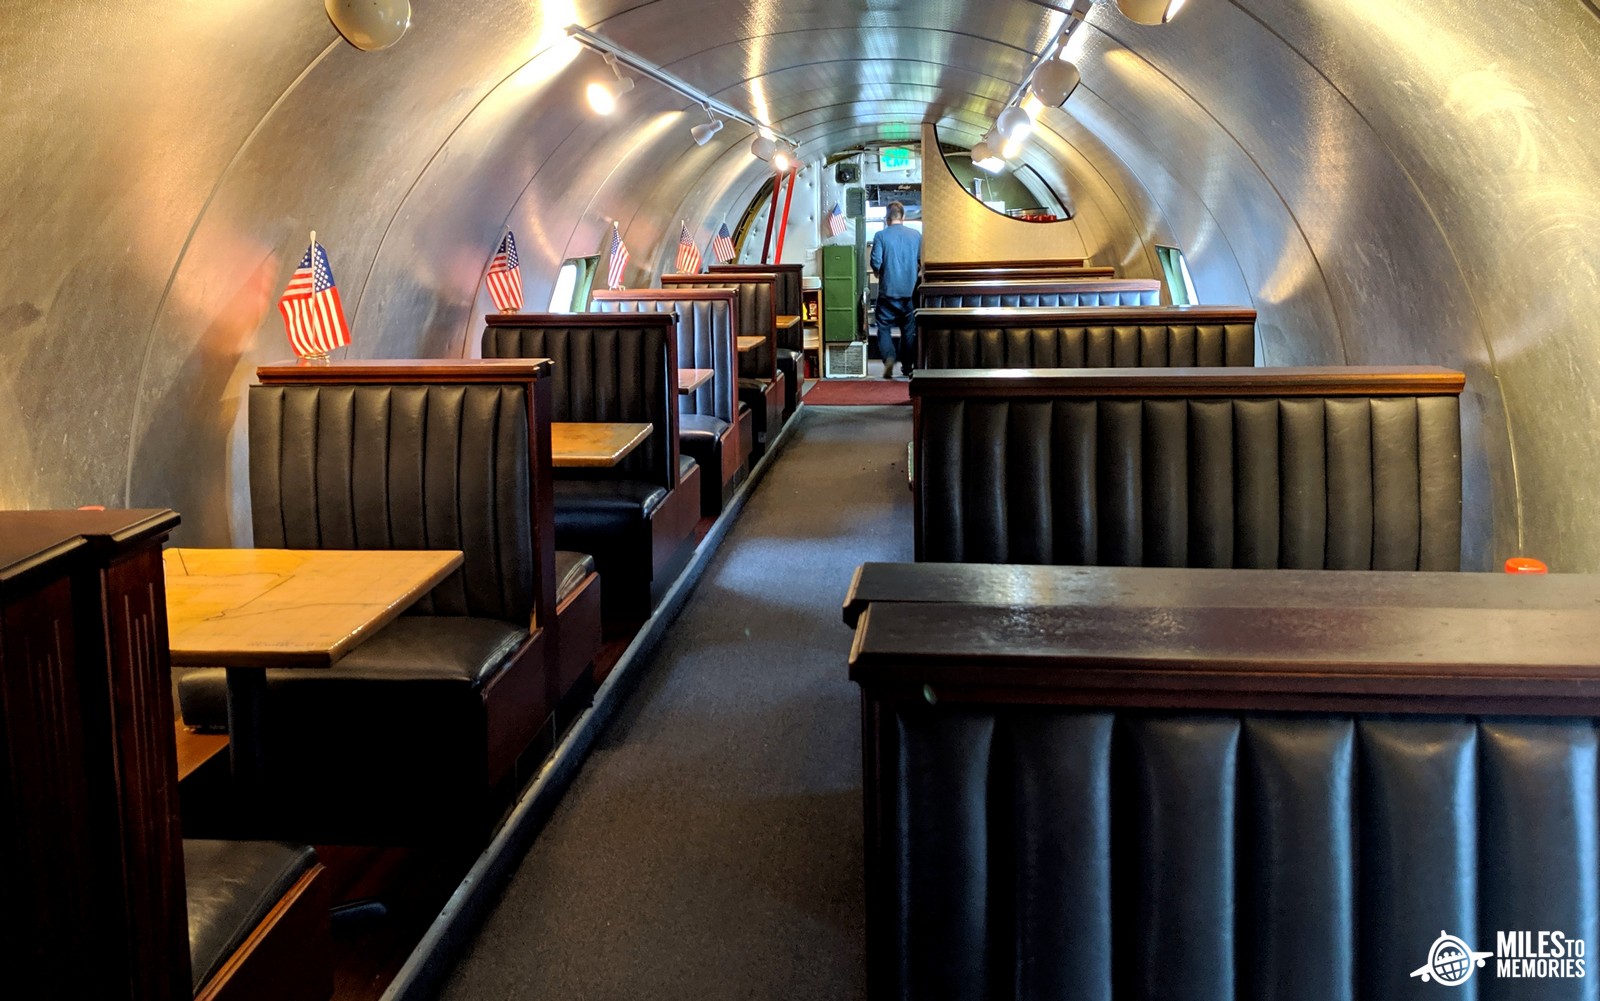 The Airplane Restaurant seating